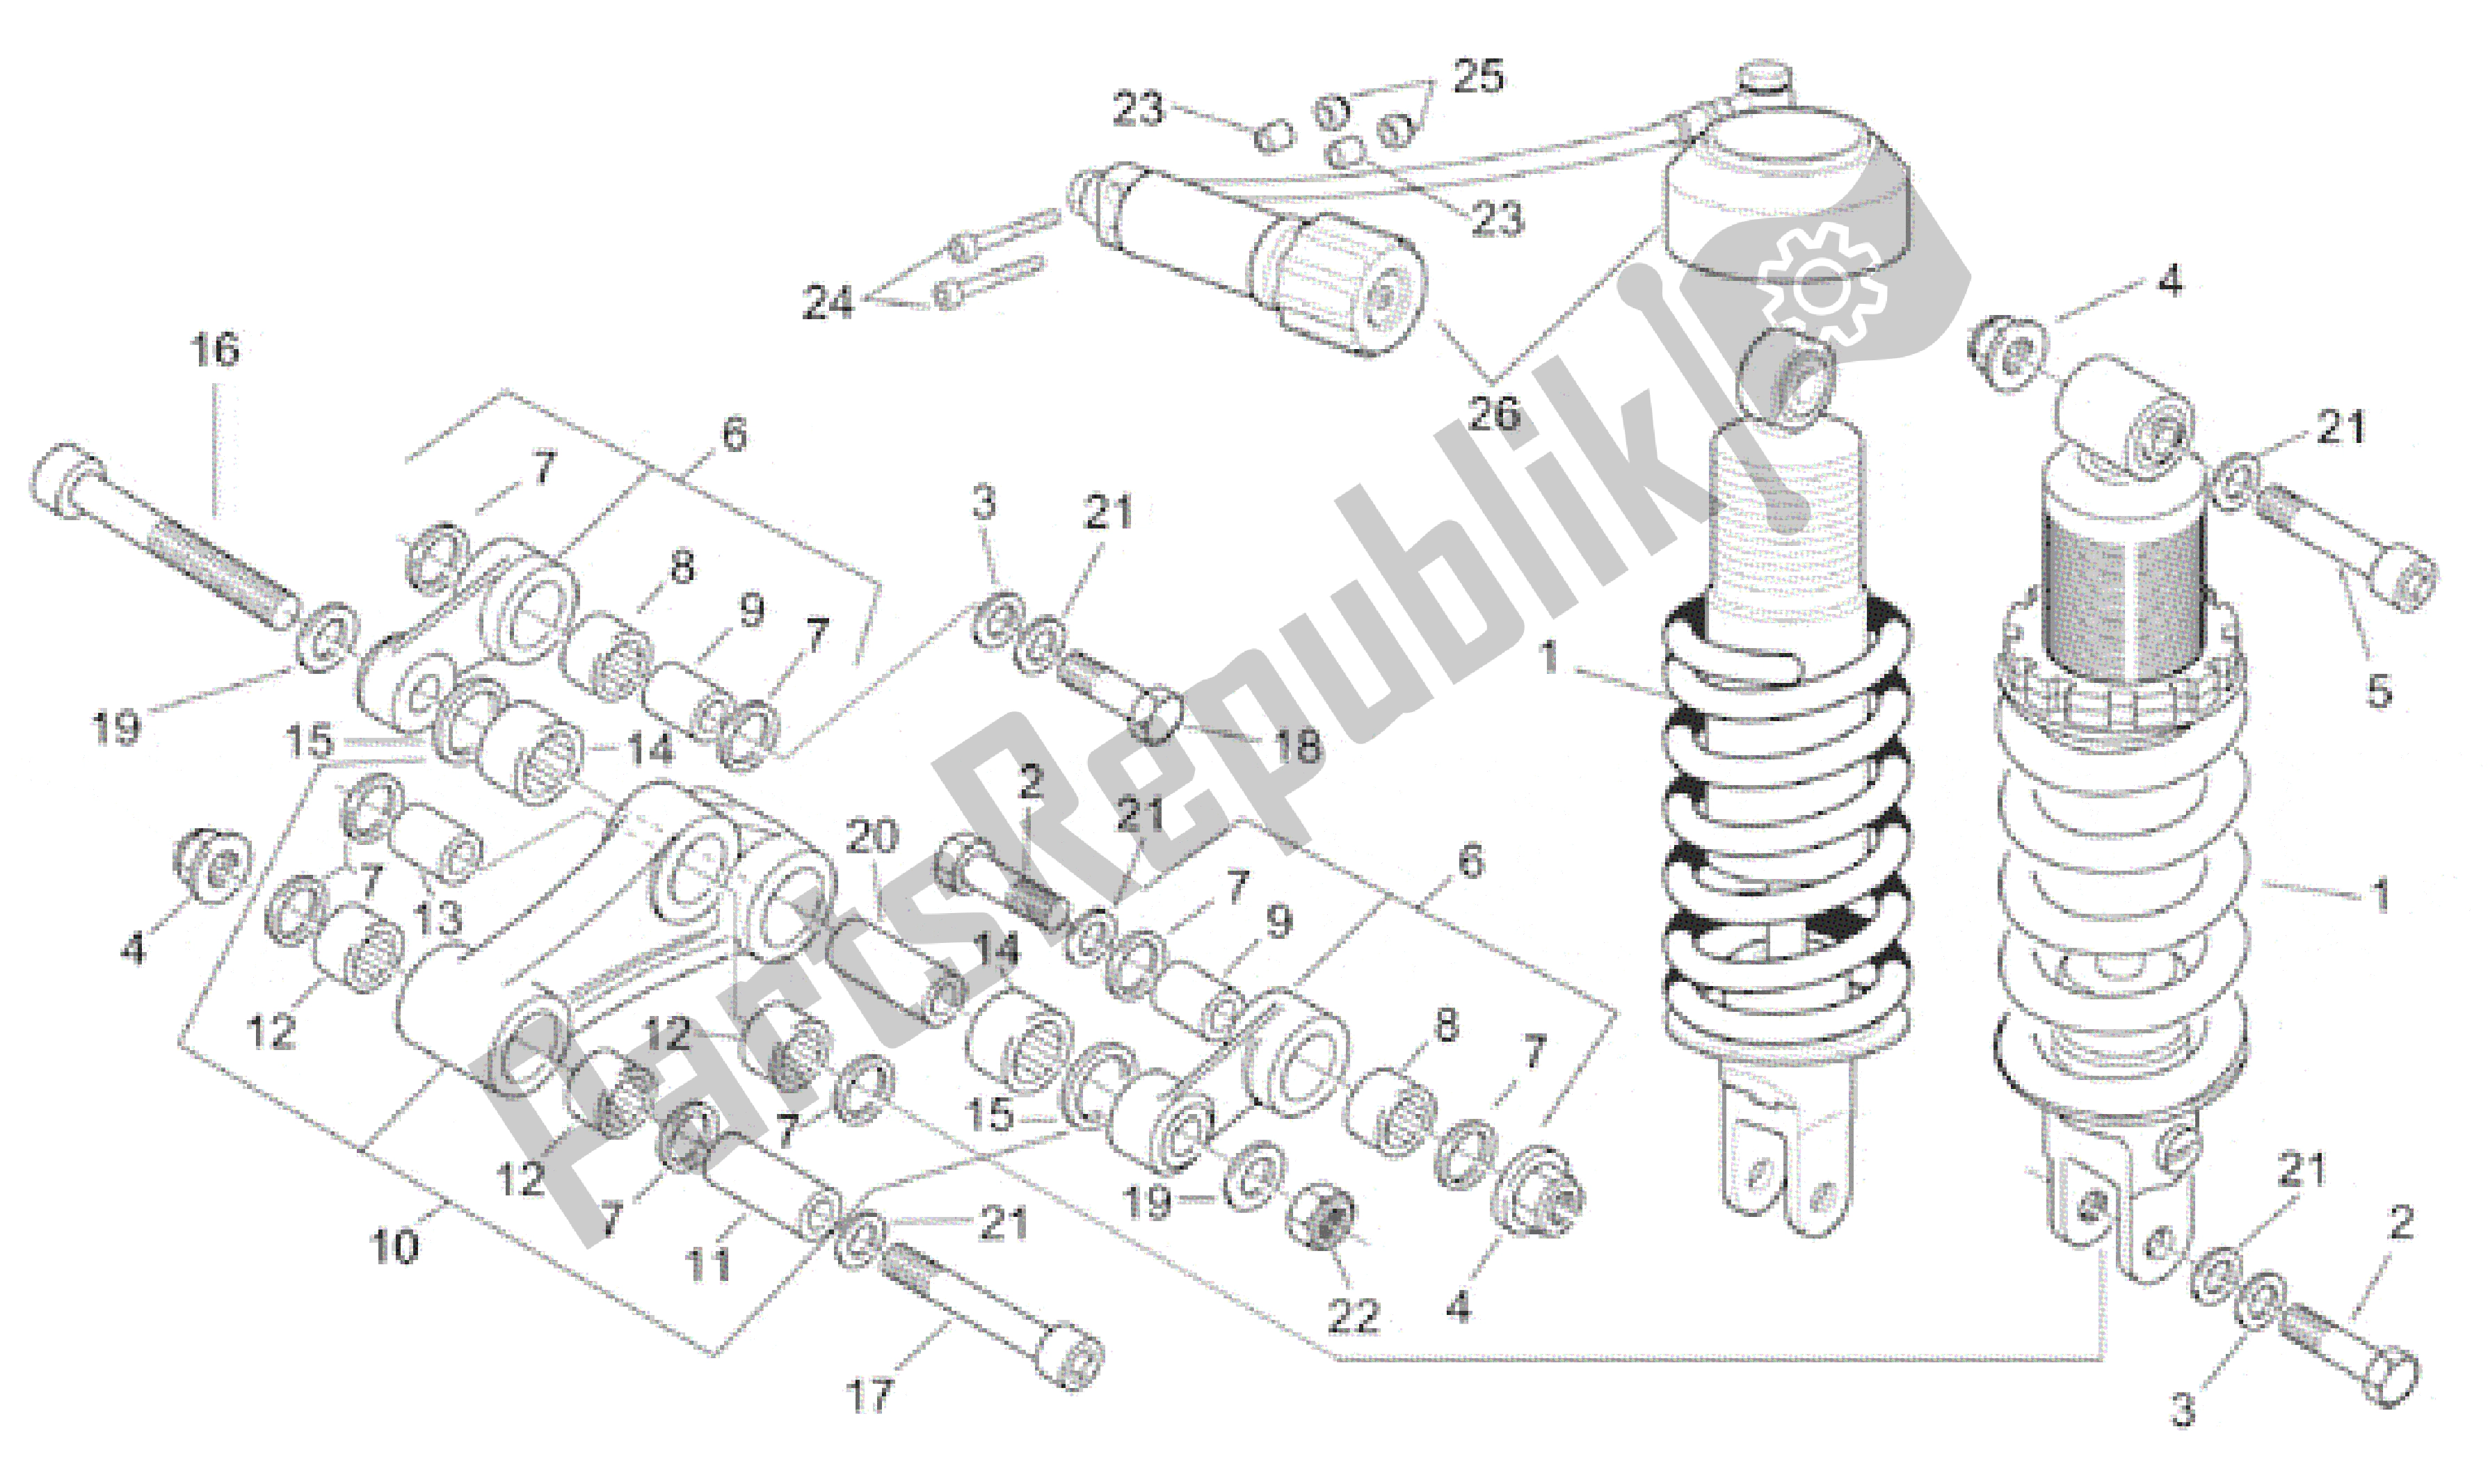 All parts for the Rear Shock Absorber of the Aprilia Pegaso 650 1997 - 2000